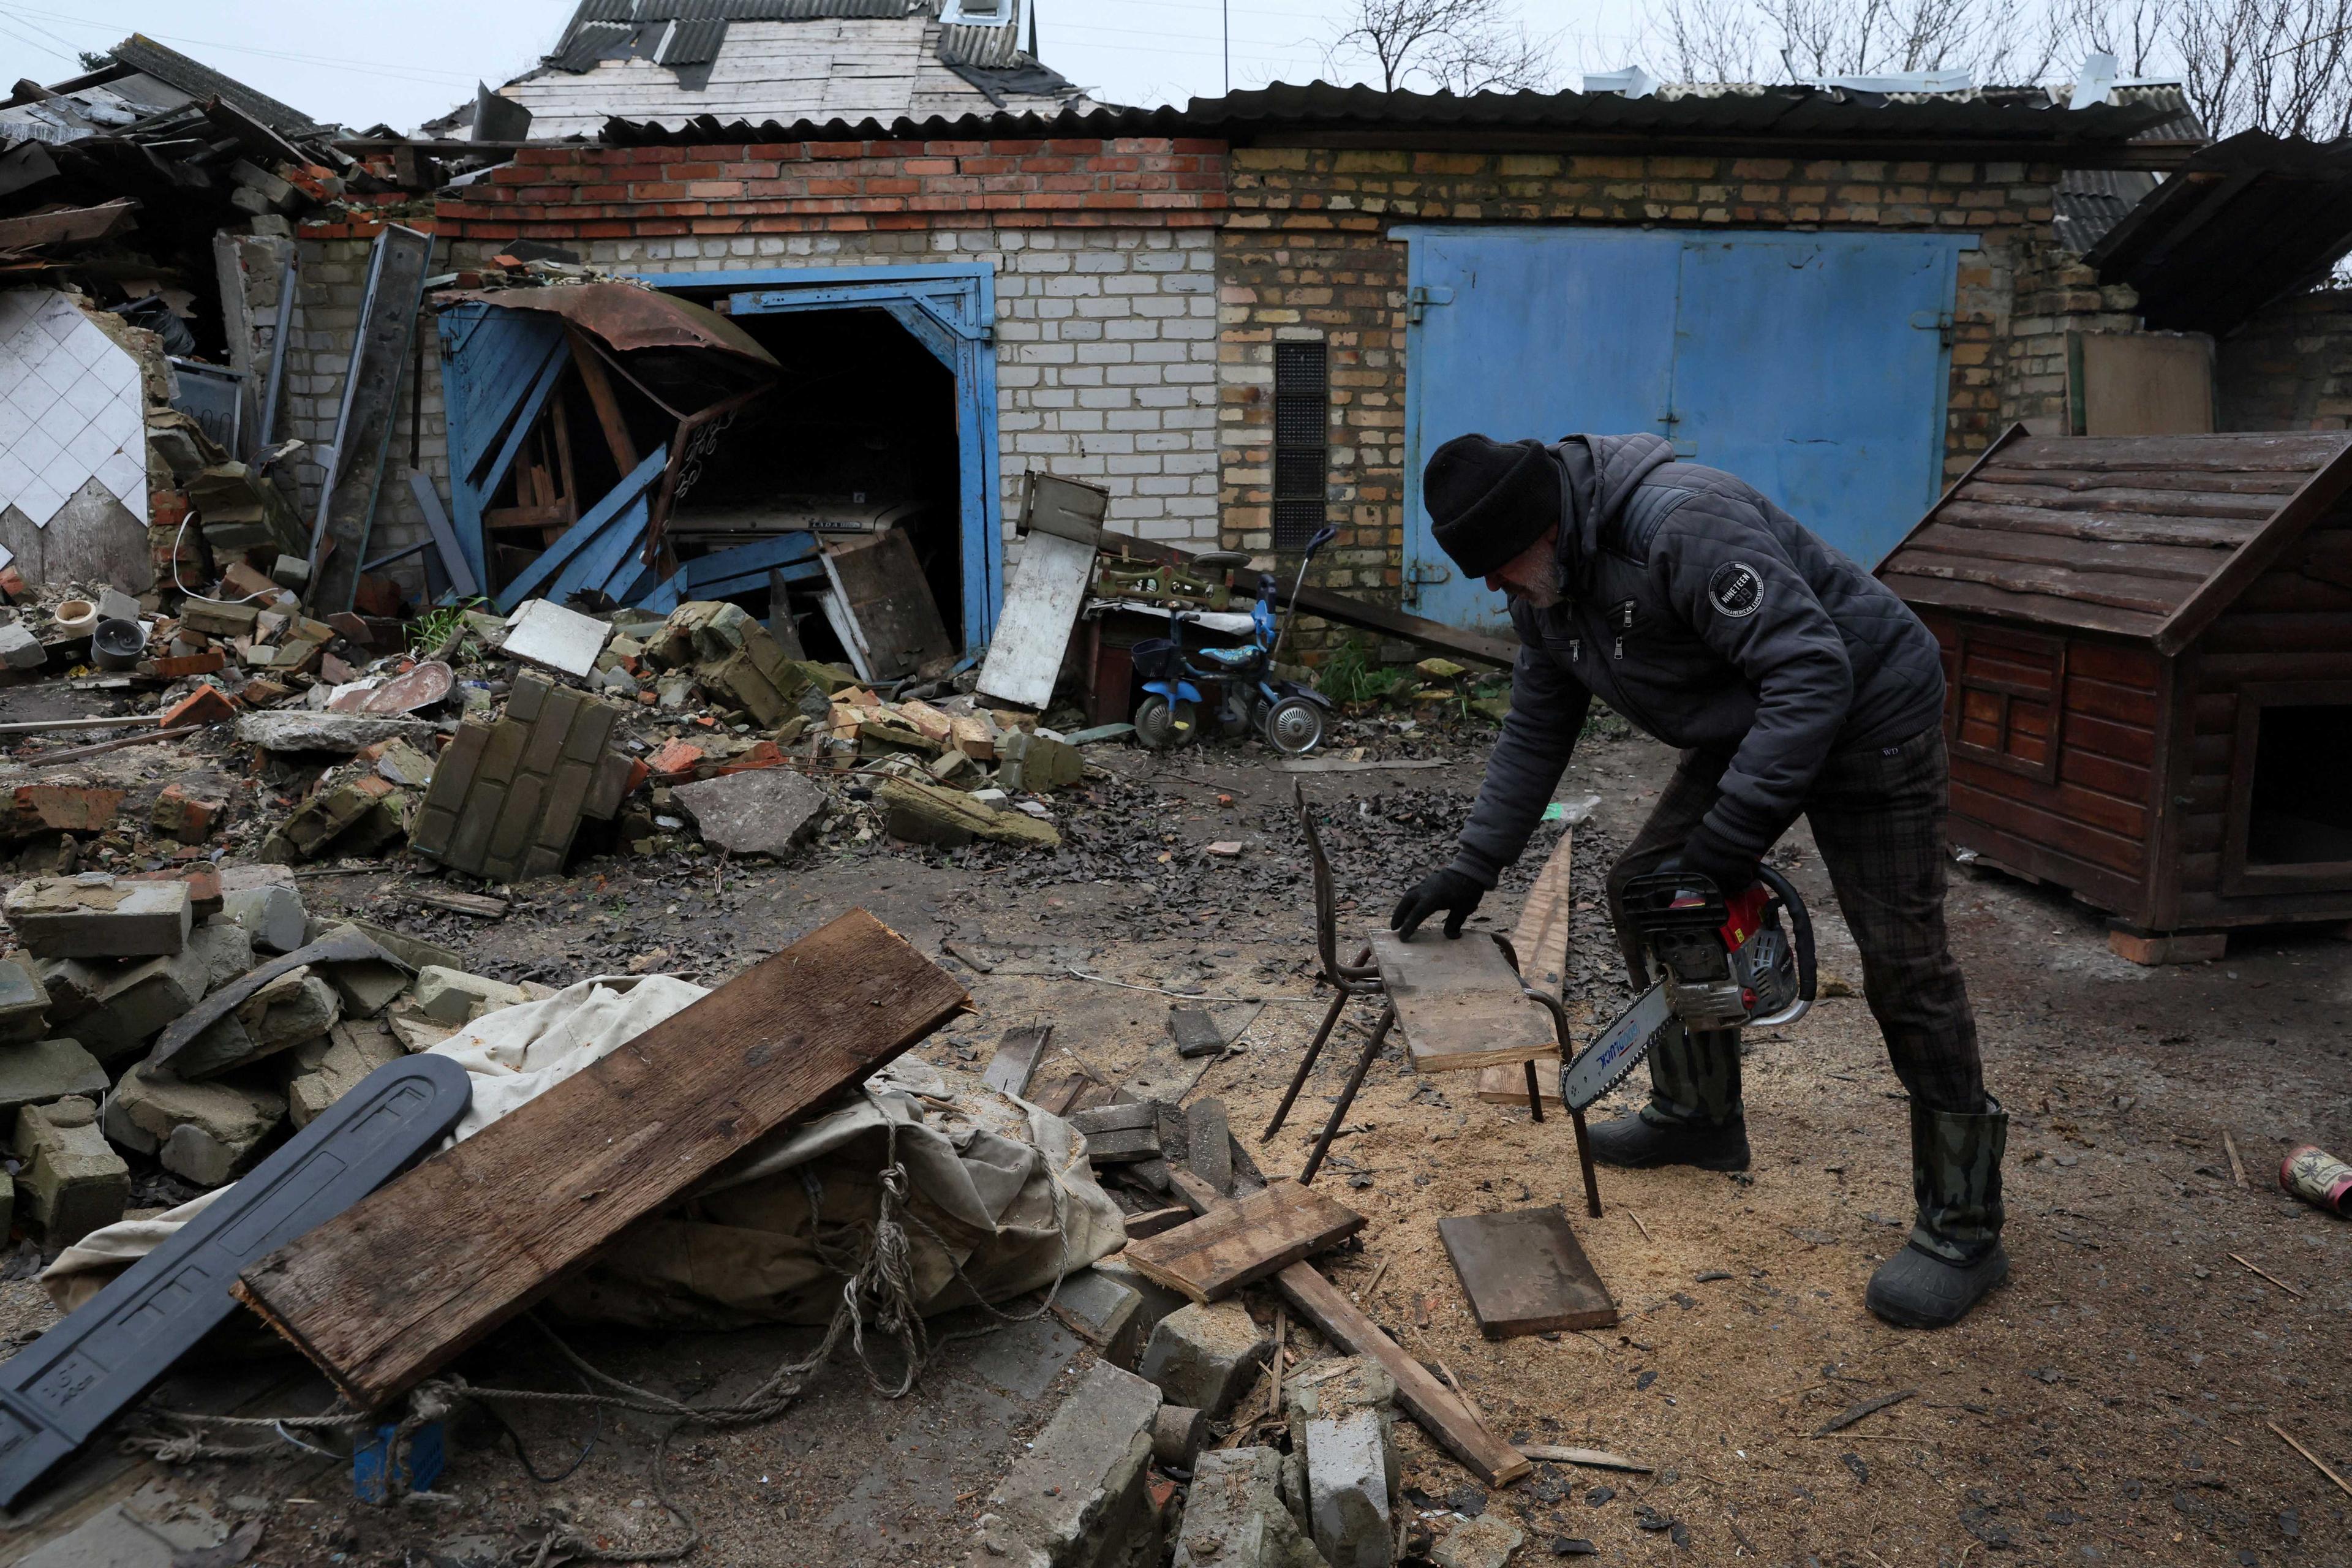 A man cuts a plank of wood into smaller pieces for firewood on his land in Siversk, Donetsk region, Ukraine, Nov 28. Photo: Reuters